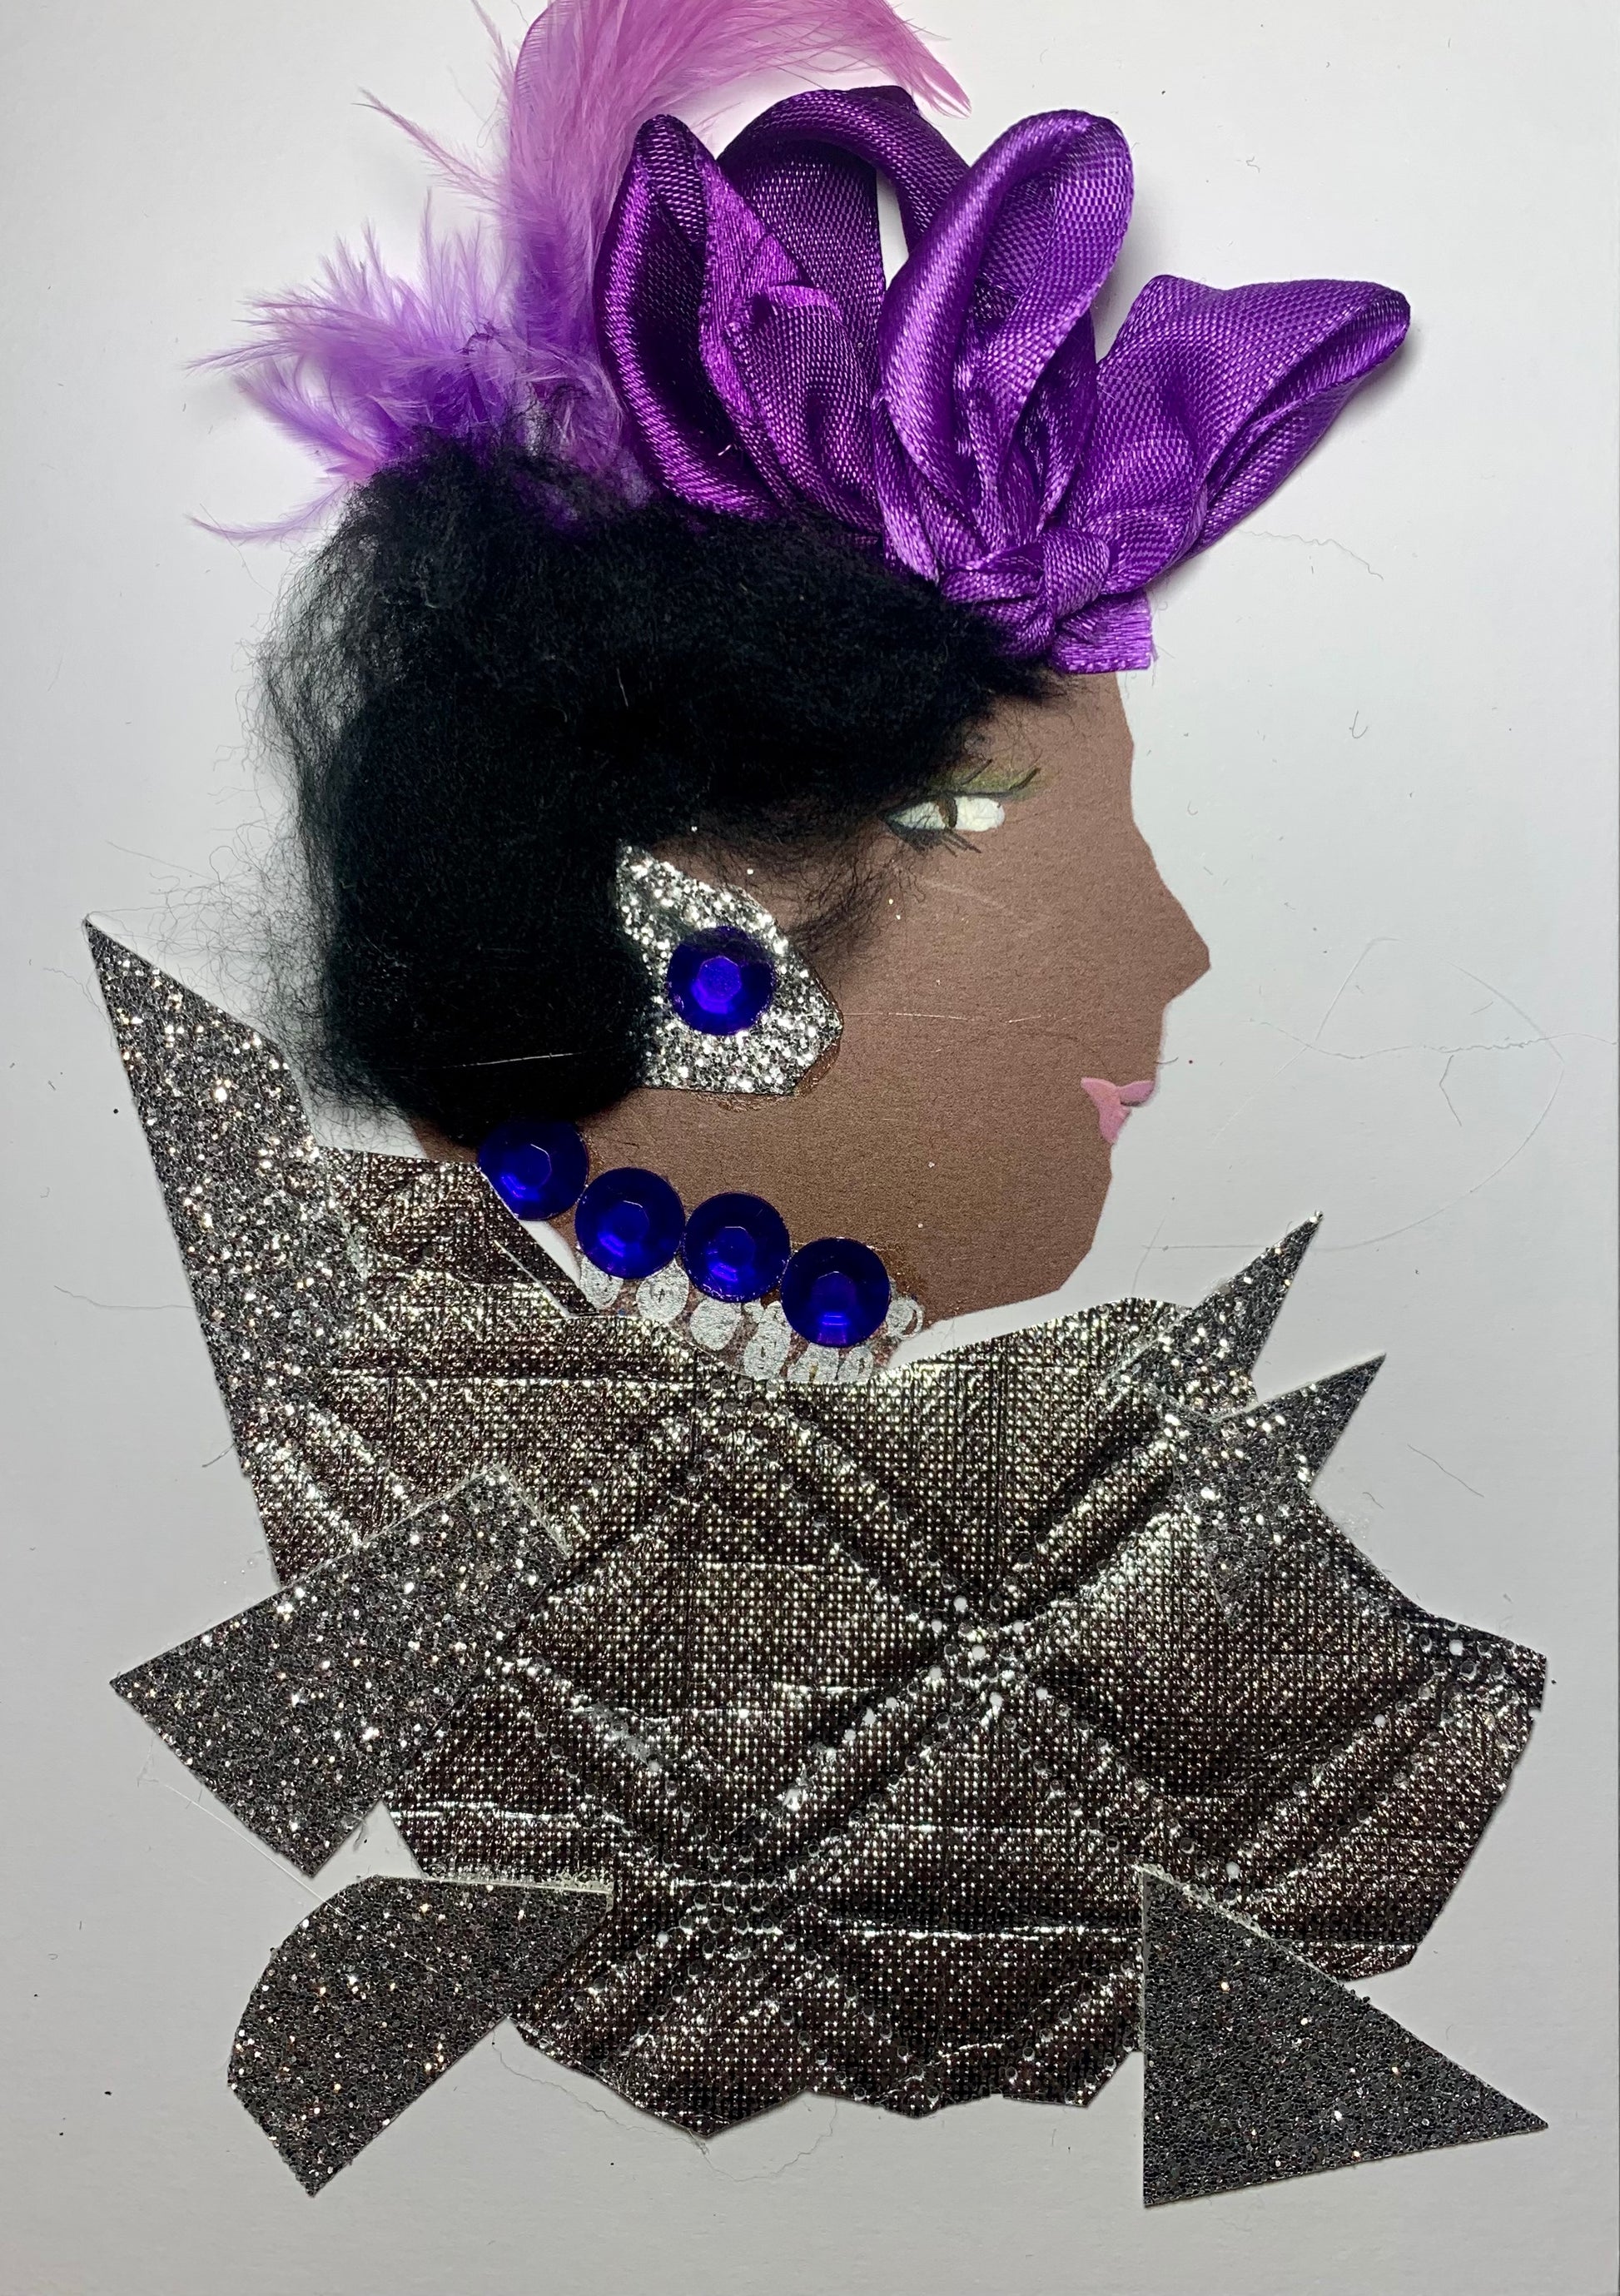 This card is called Olaitan. She wears a geometric silver blouse, purple ribbon in her short black hair, and blue gem jewellery. 